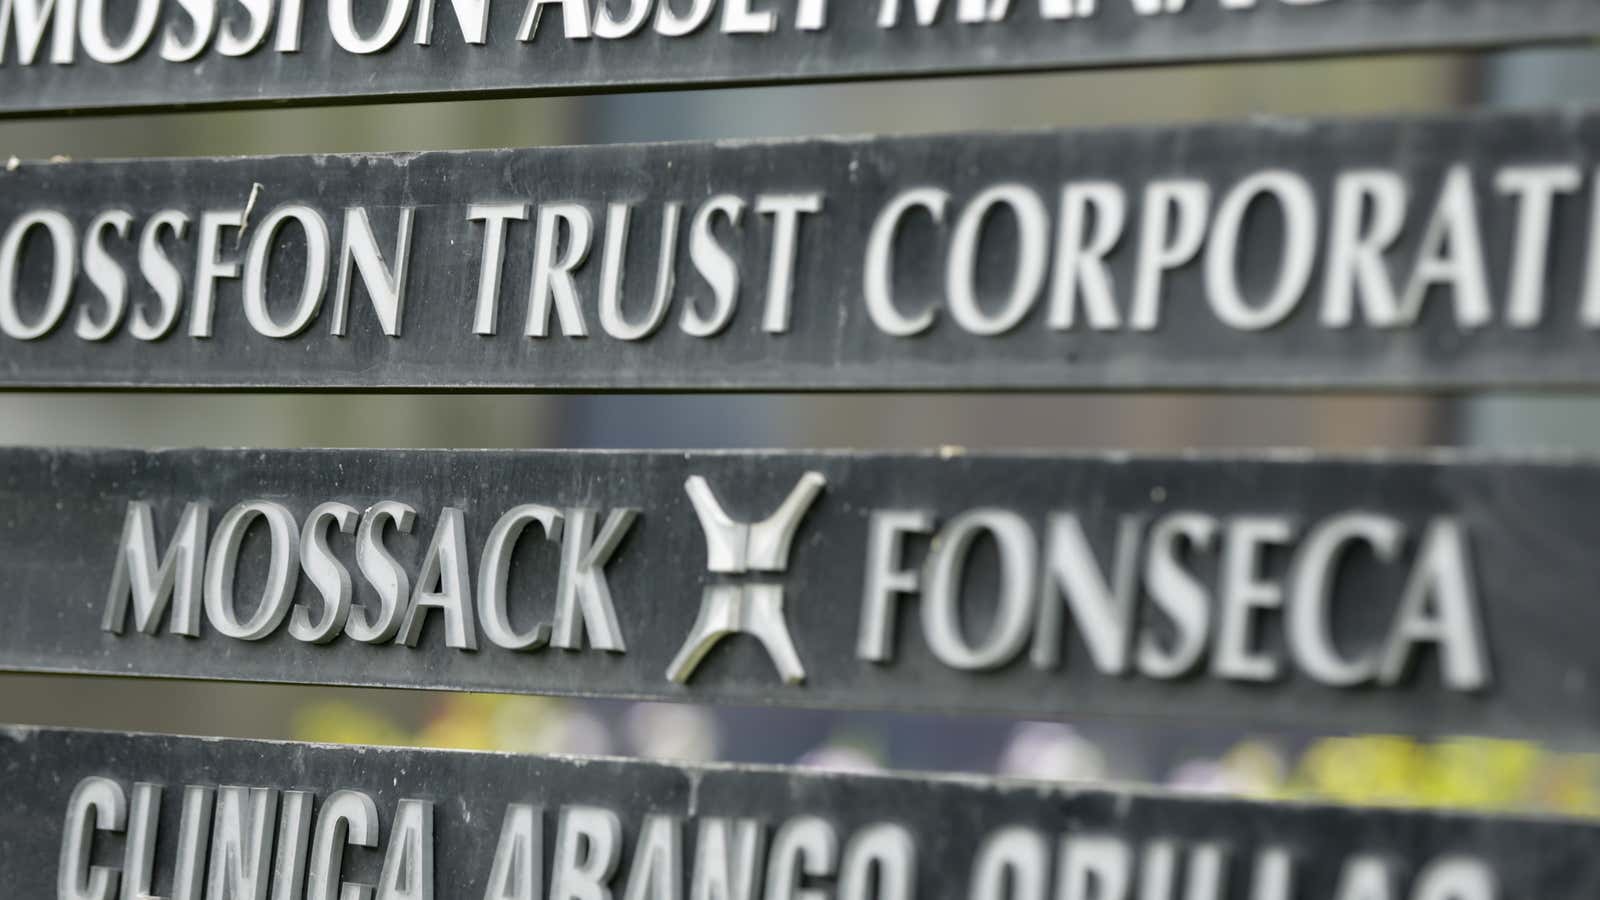 The Panama Papers revealed how law firm Mossack Fonseca enabled vast amounts of corruption through anonymous shell companies.